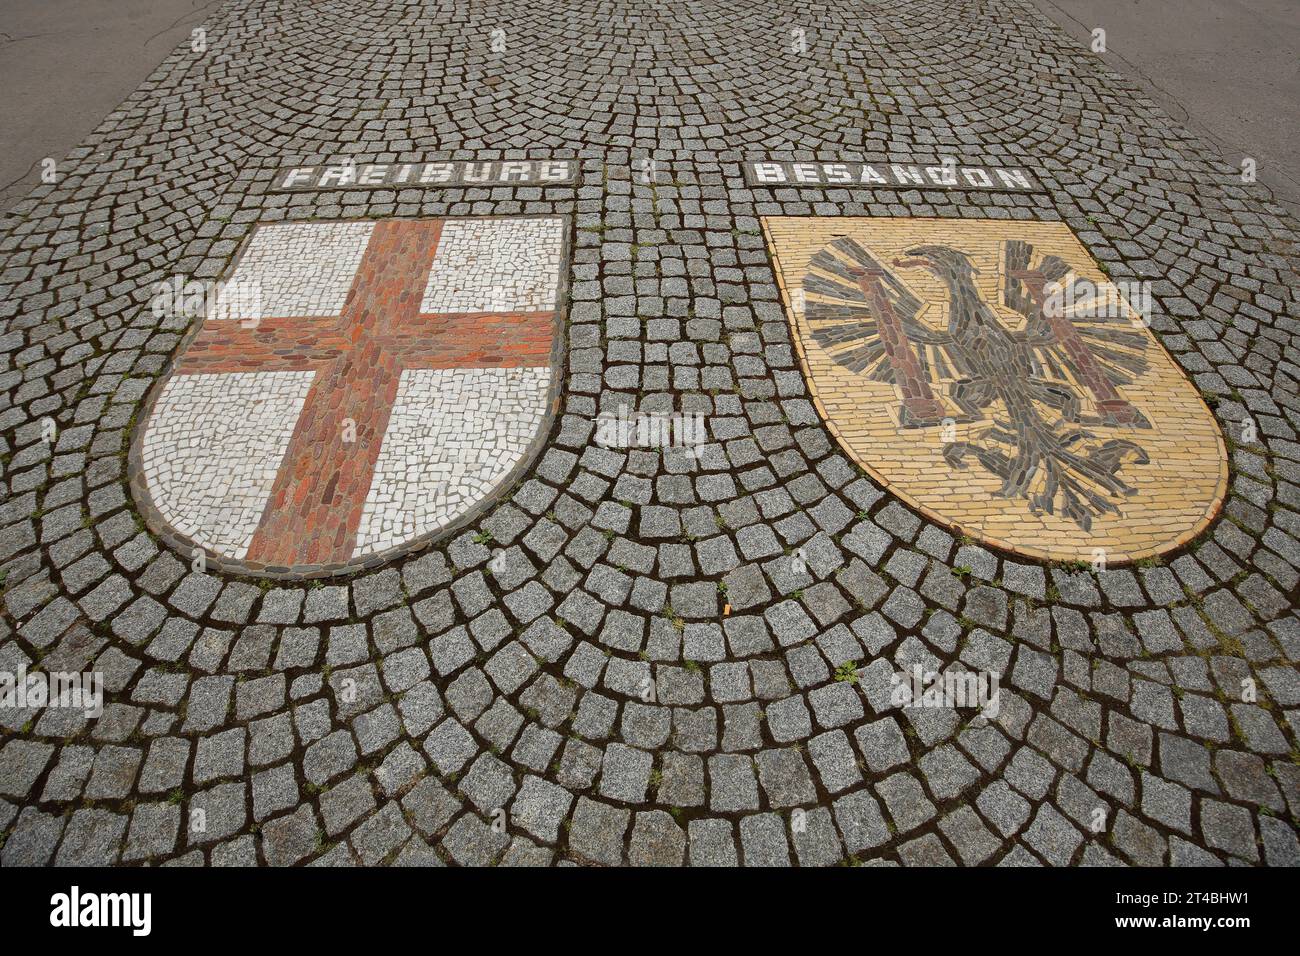 City coat of arms with floor mosaic from the twin city of Freiburg im Breisgau, Hotel de Ville, City Hall, Mosaic, Besancon, Besancon, Doubs, France Stock Photo